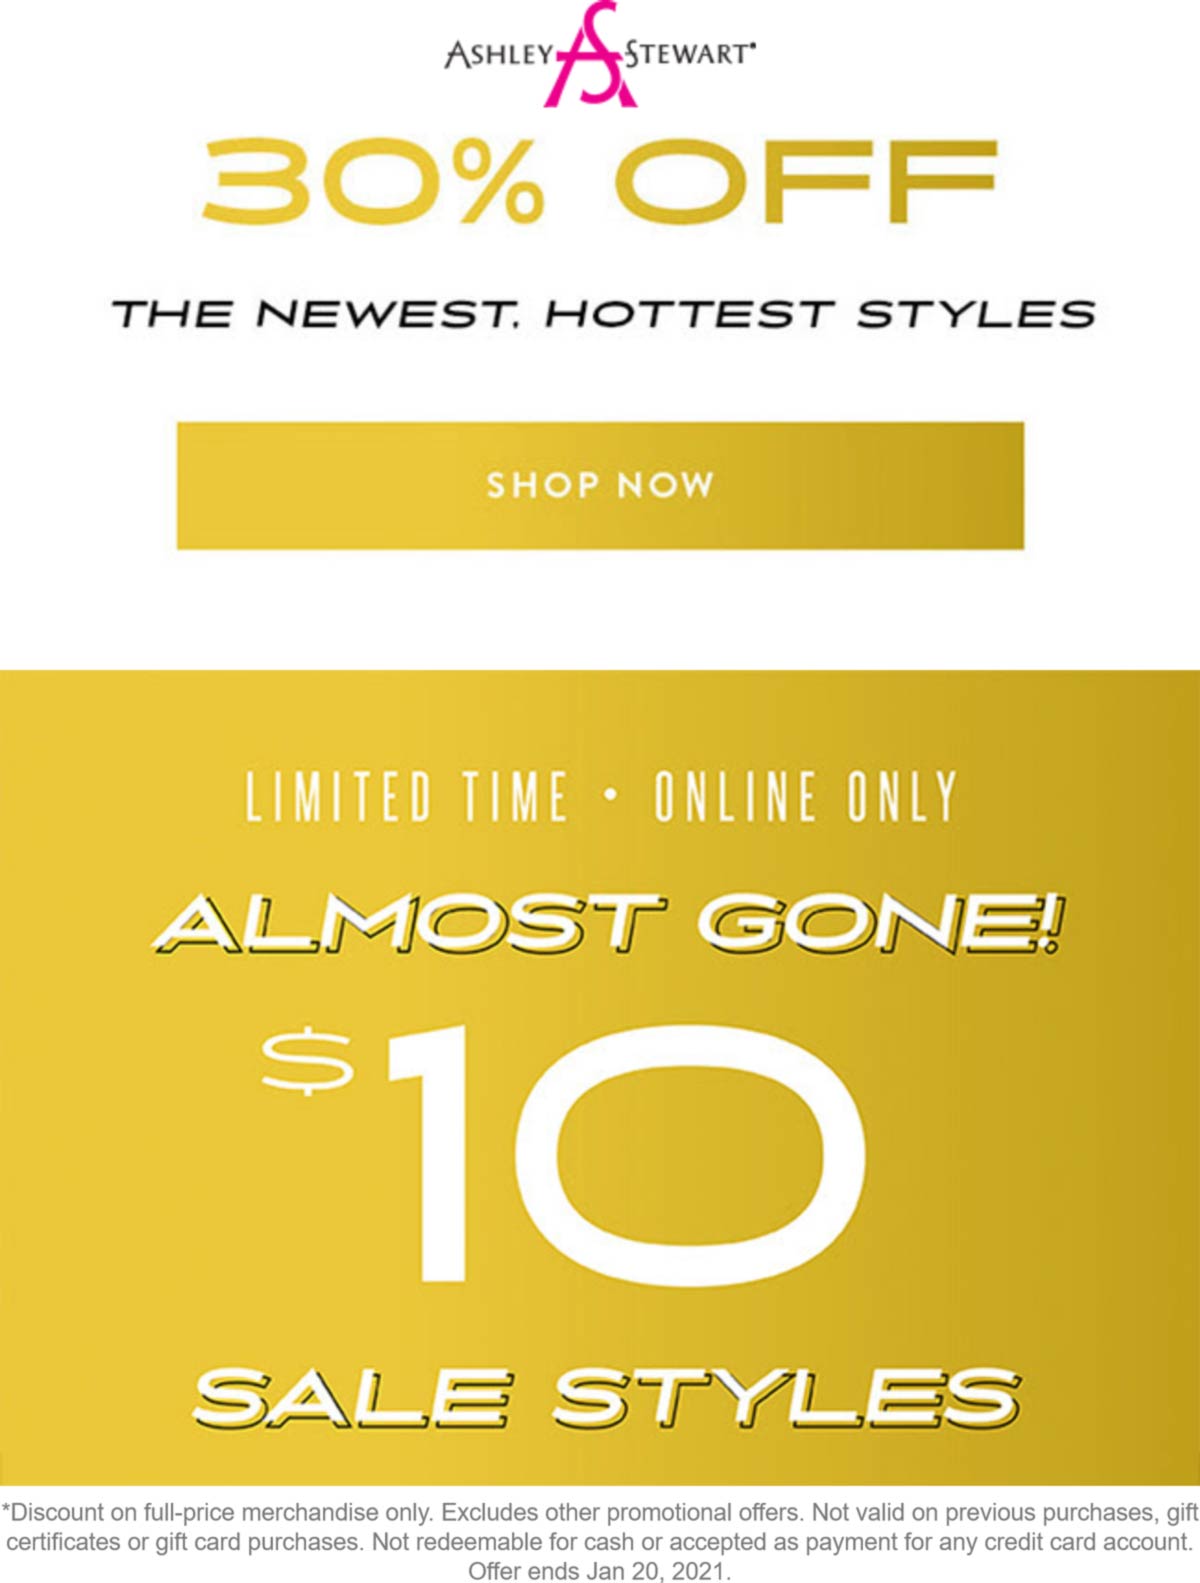 Ashley Stewart stores Coupon  30% off online today at Ashley Stewart #ashleystewart 